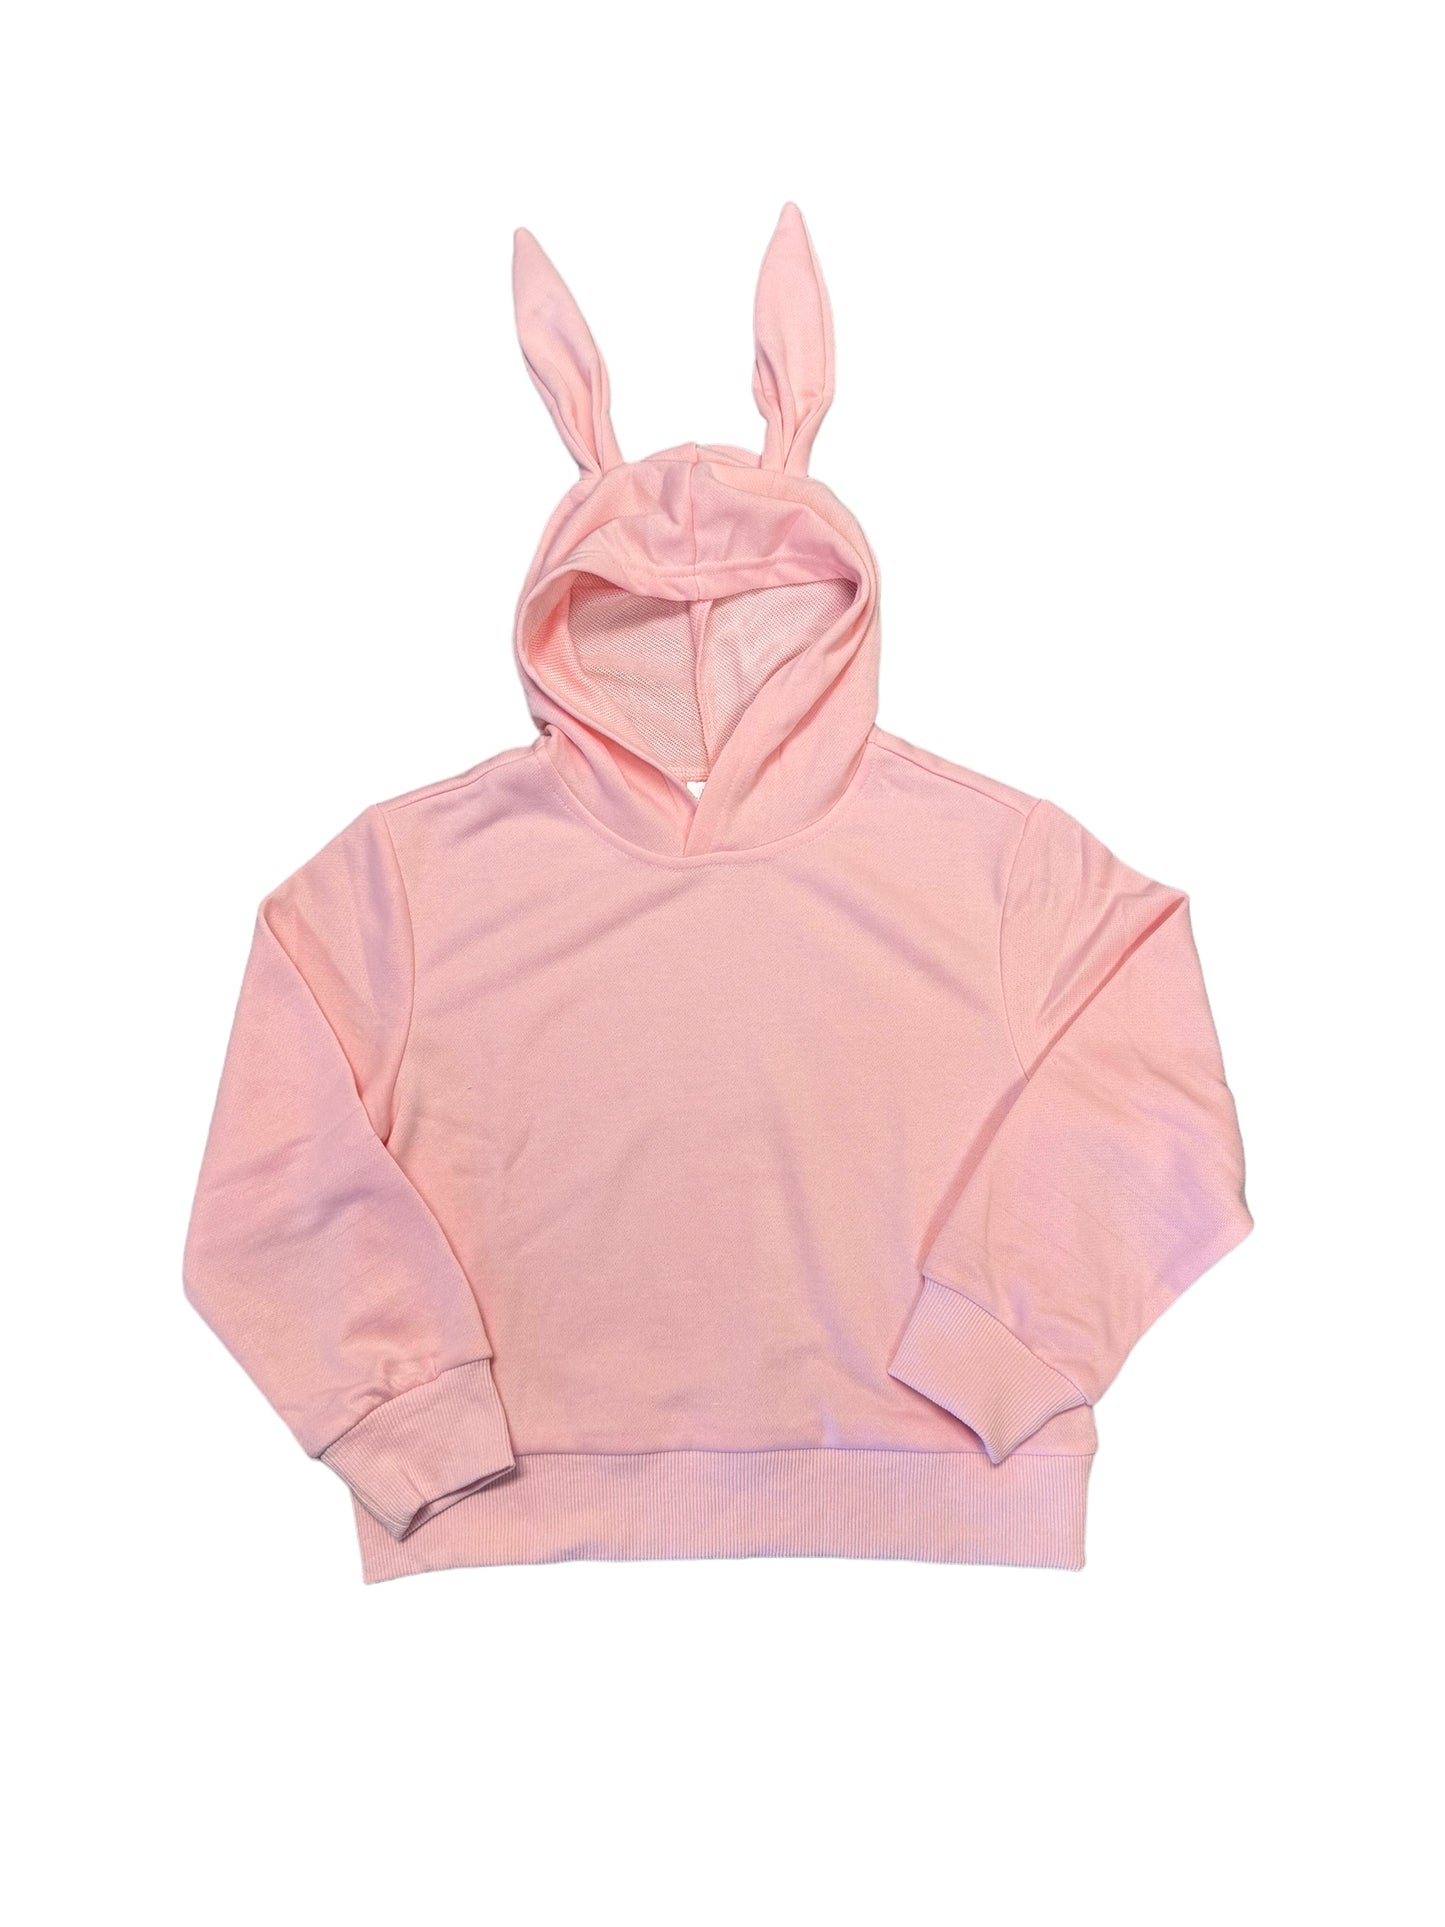 Kids Bunny Ear Hoodie Sublimation